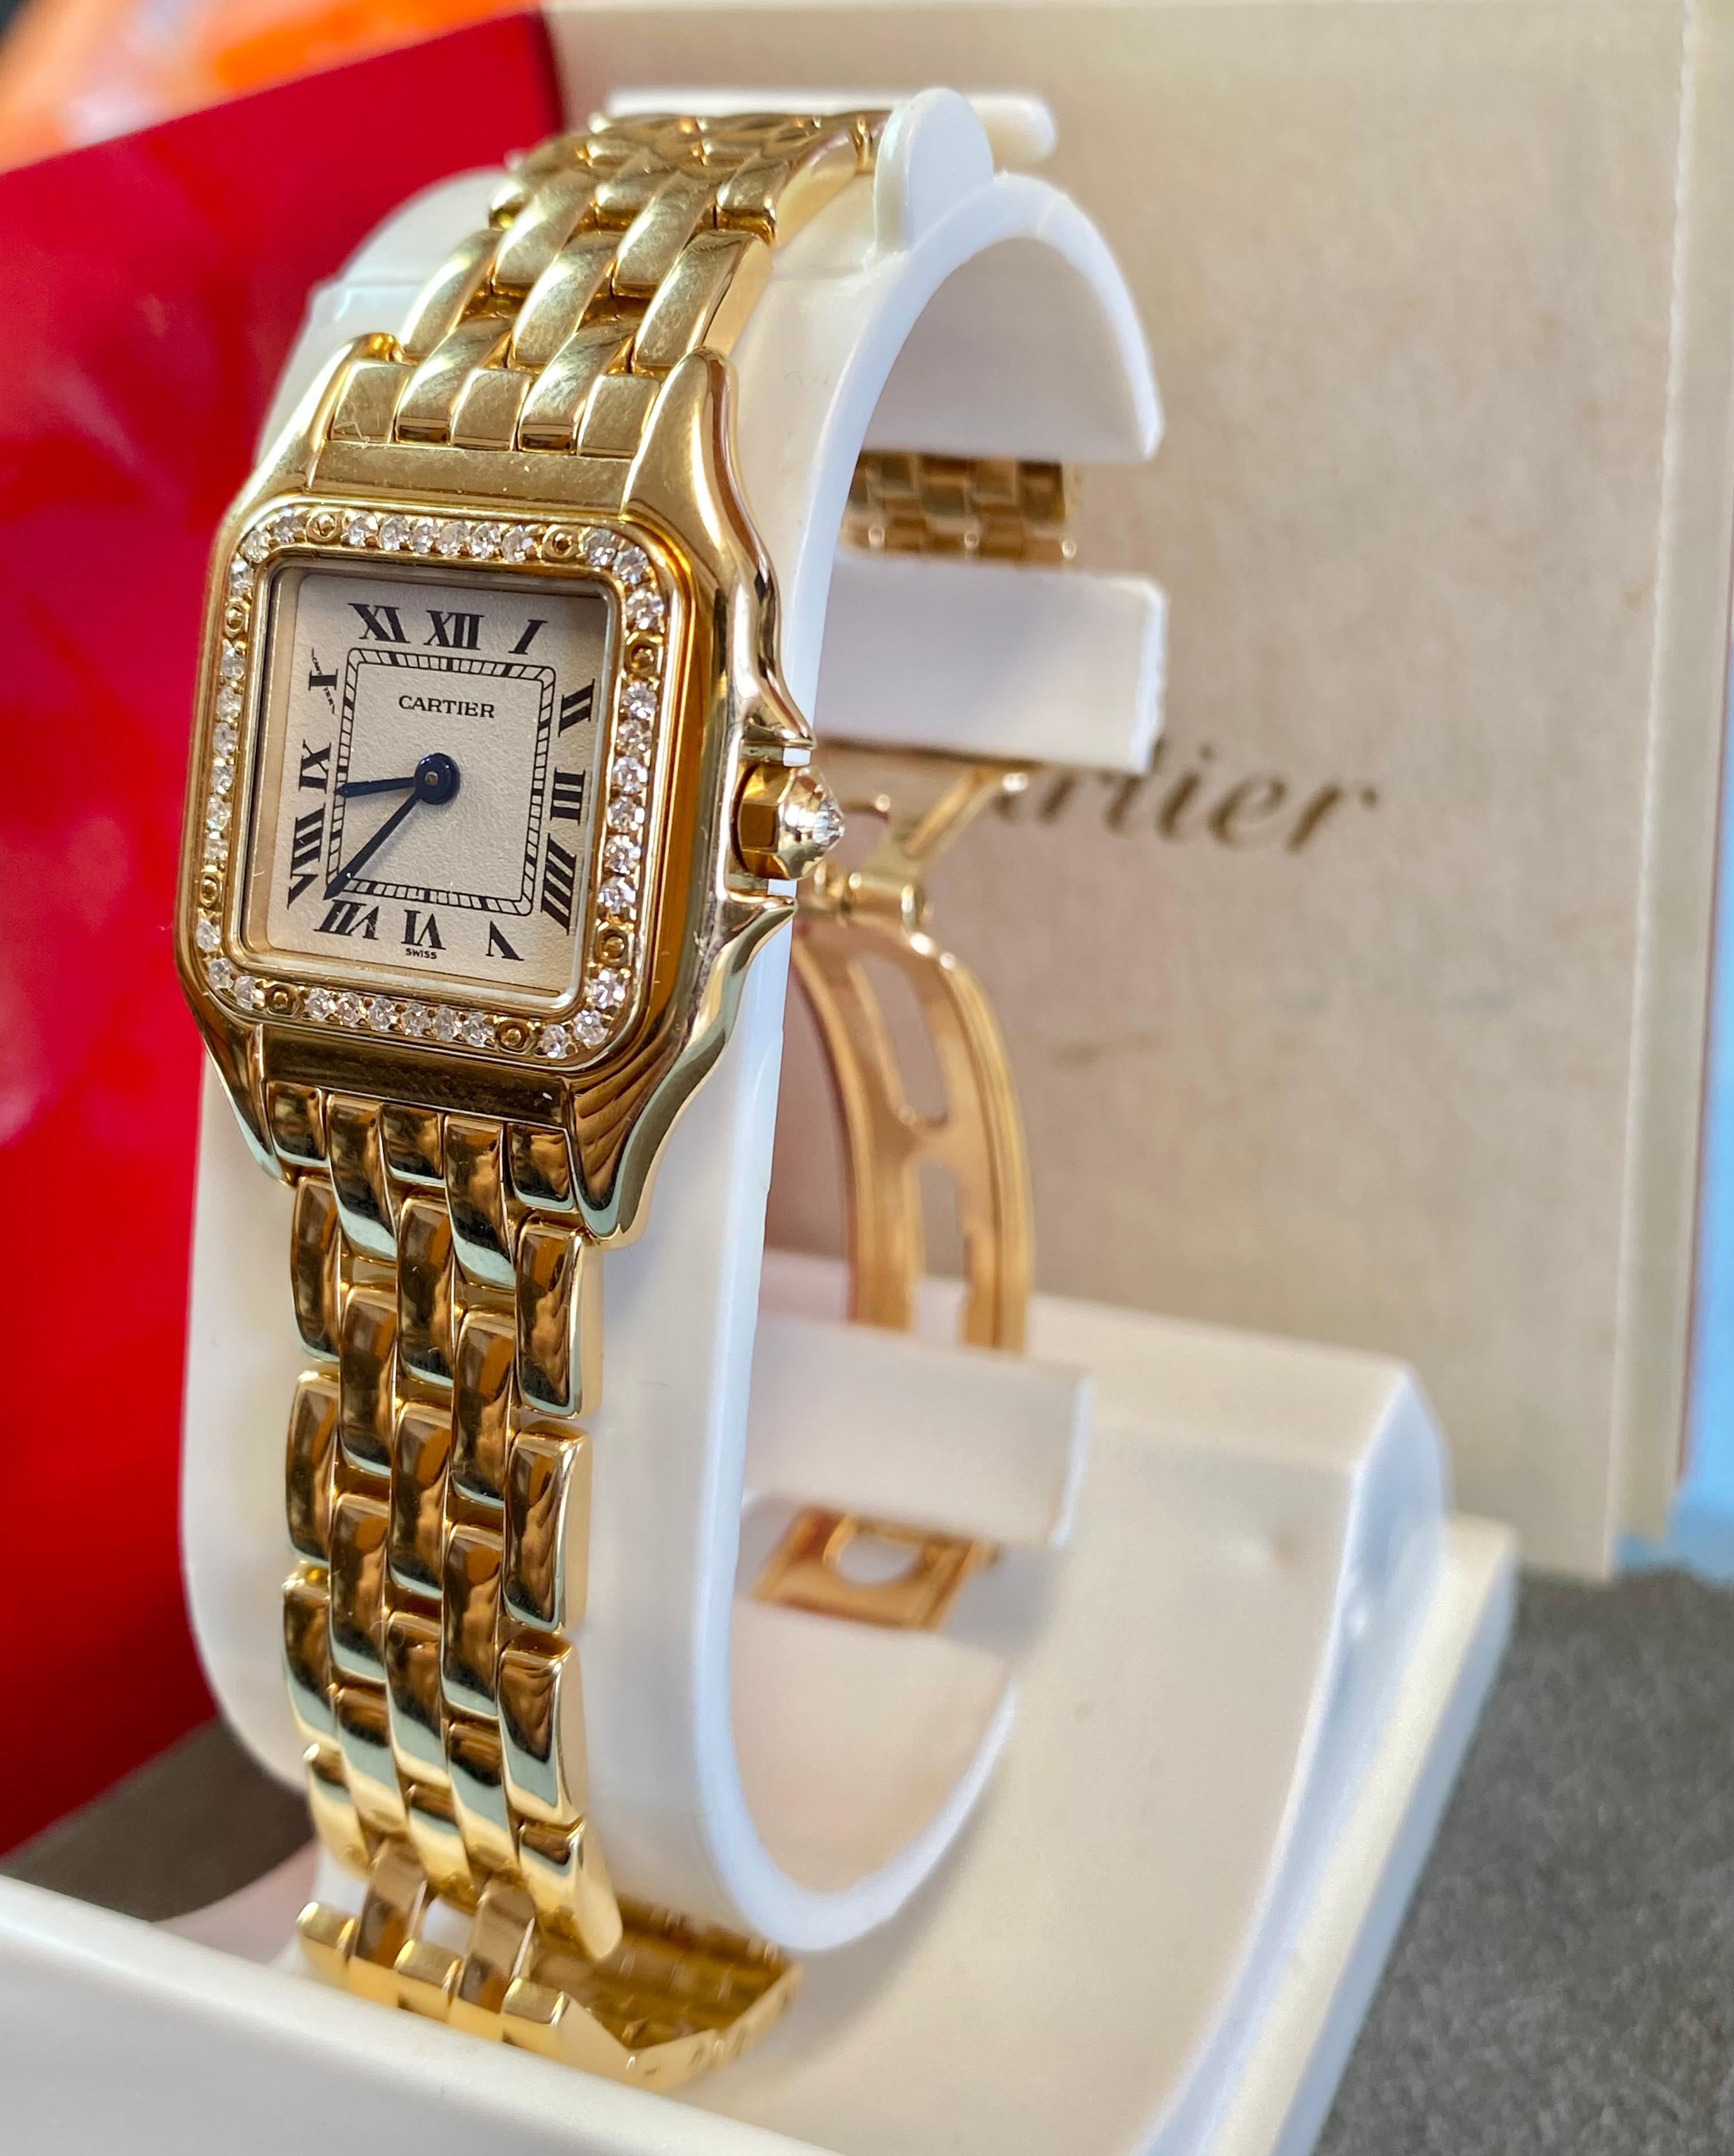 Cartier Panthere Ladies Wristwatch in 18k Gold with Cartier Diamond Bezel 6